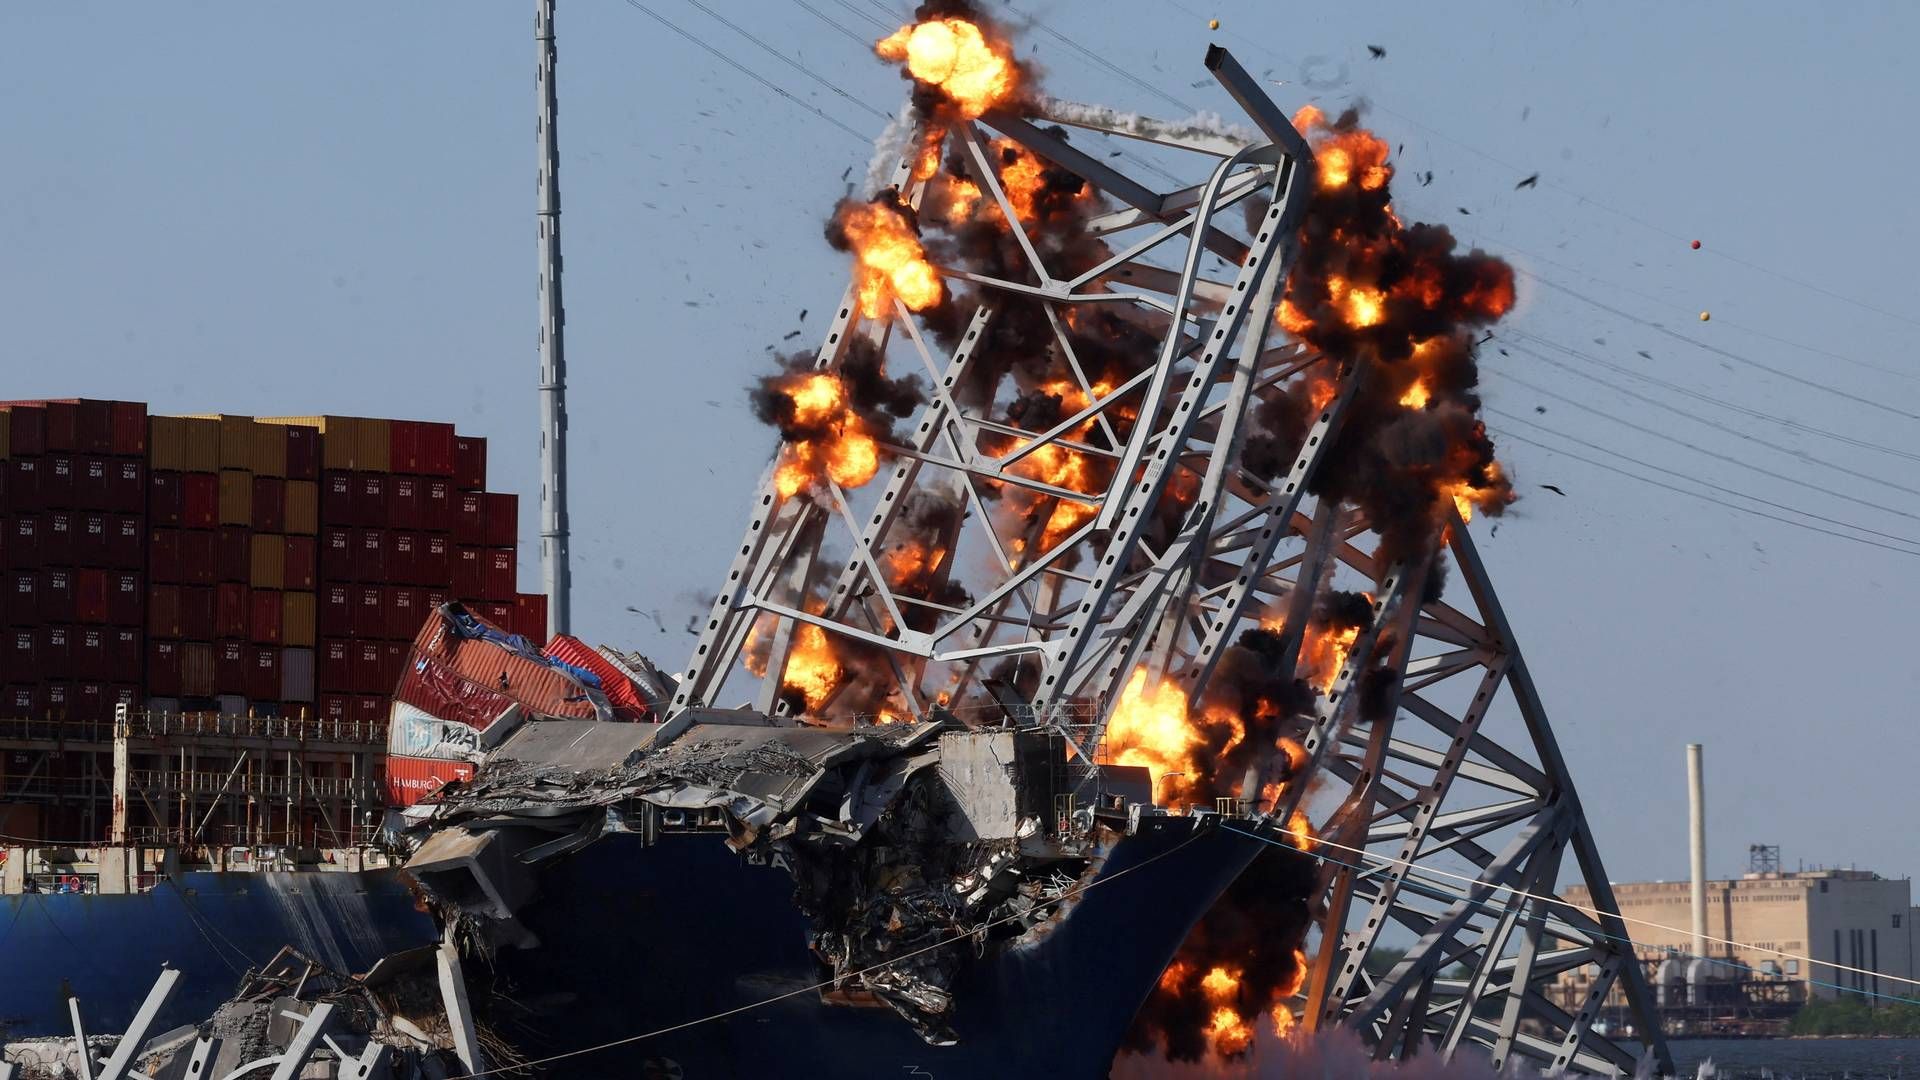 Controlled explosions have been used to manage the wreckage of the Francis Scott Key Bridge. | Photo: Leah Millis/Reuters/Ritzau Scanpix